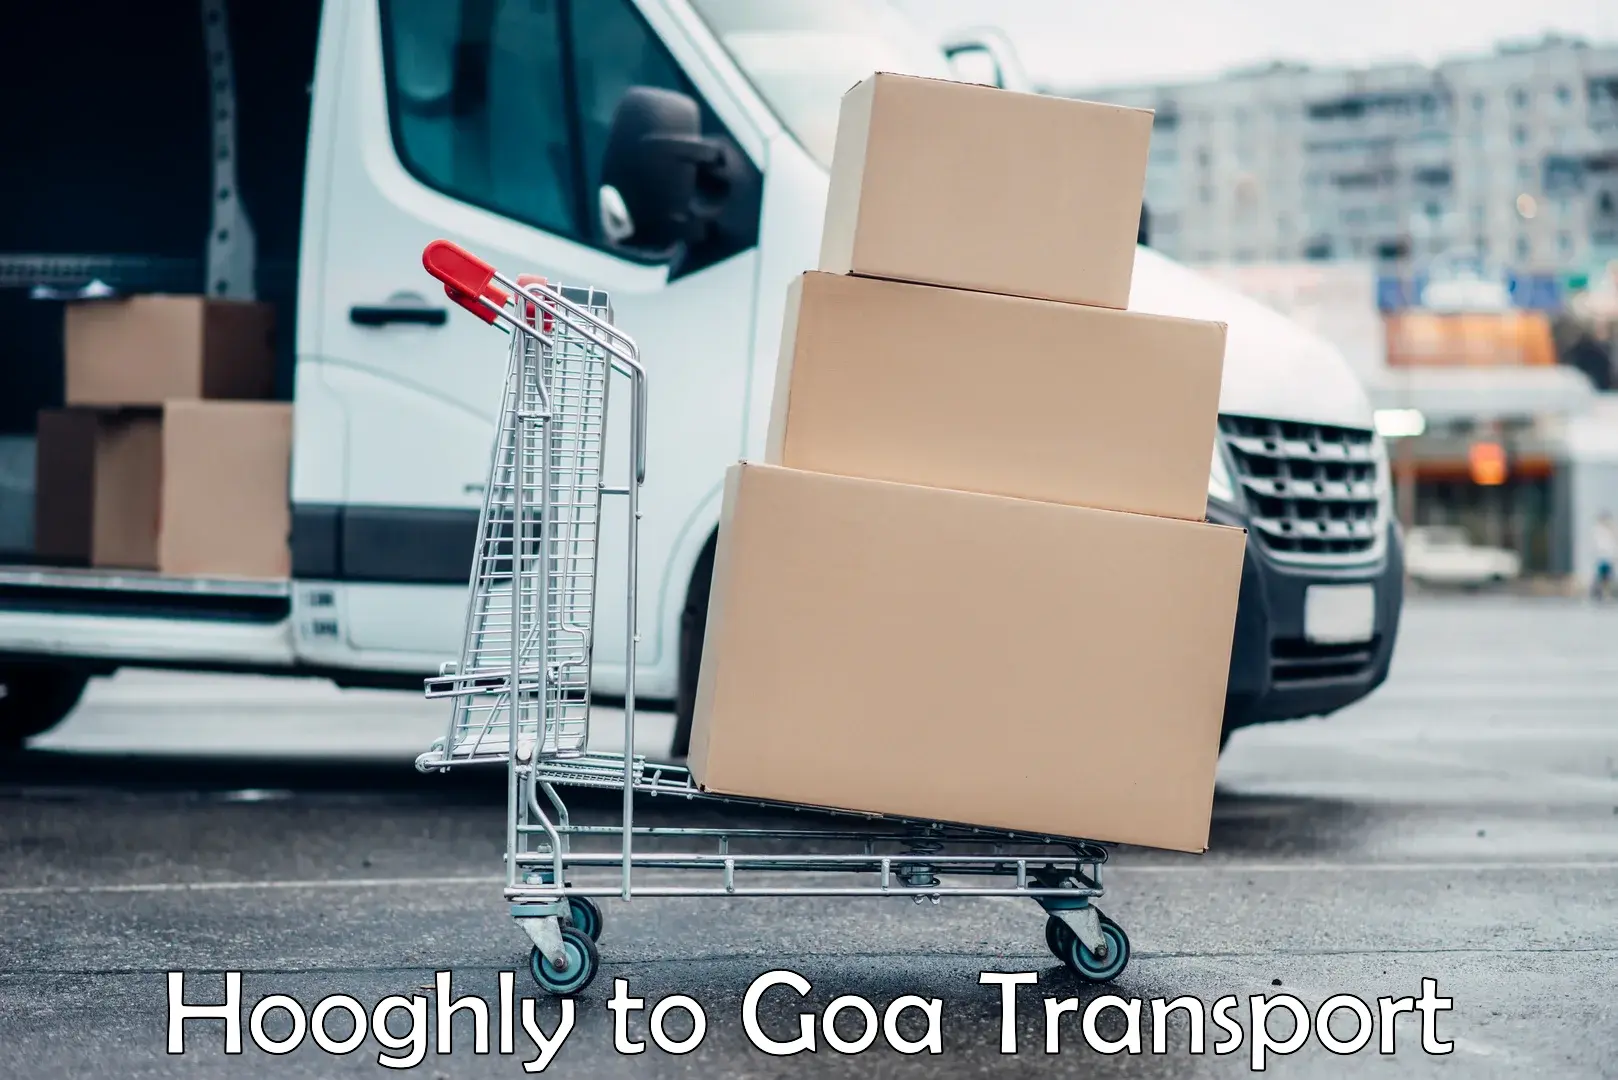 Transportation solution services Hooghly to Goa University